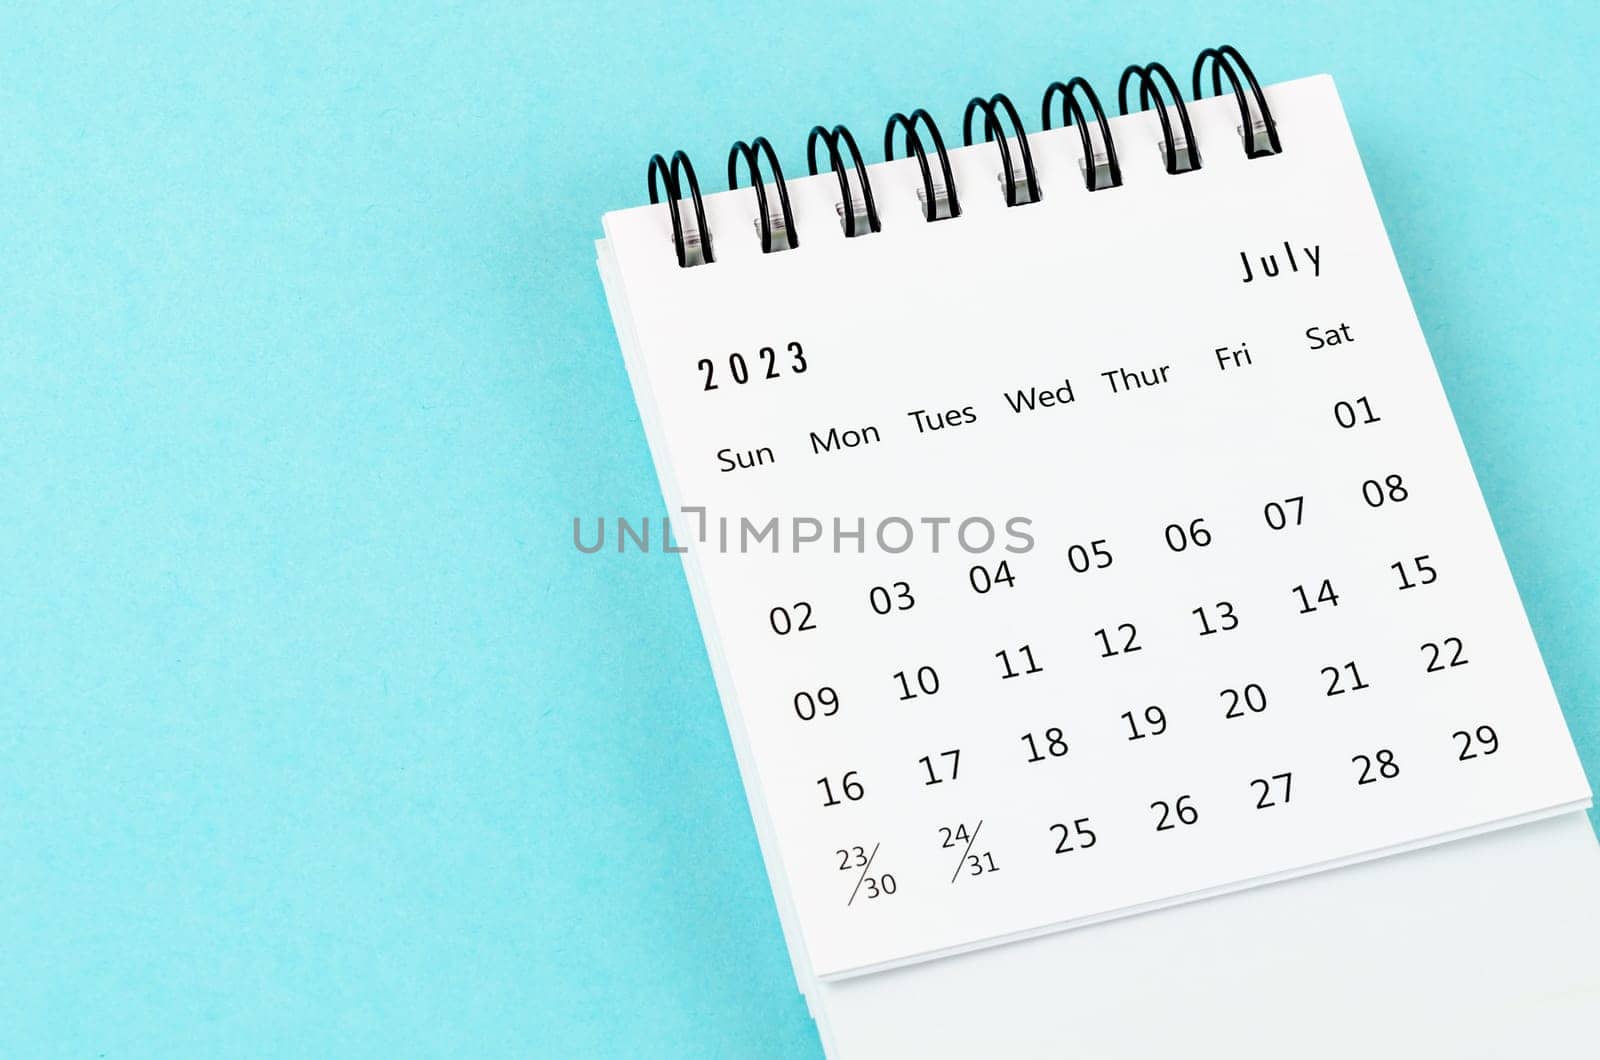 July 2023 Monthly desk calendar for 2023 year on blue background.